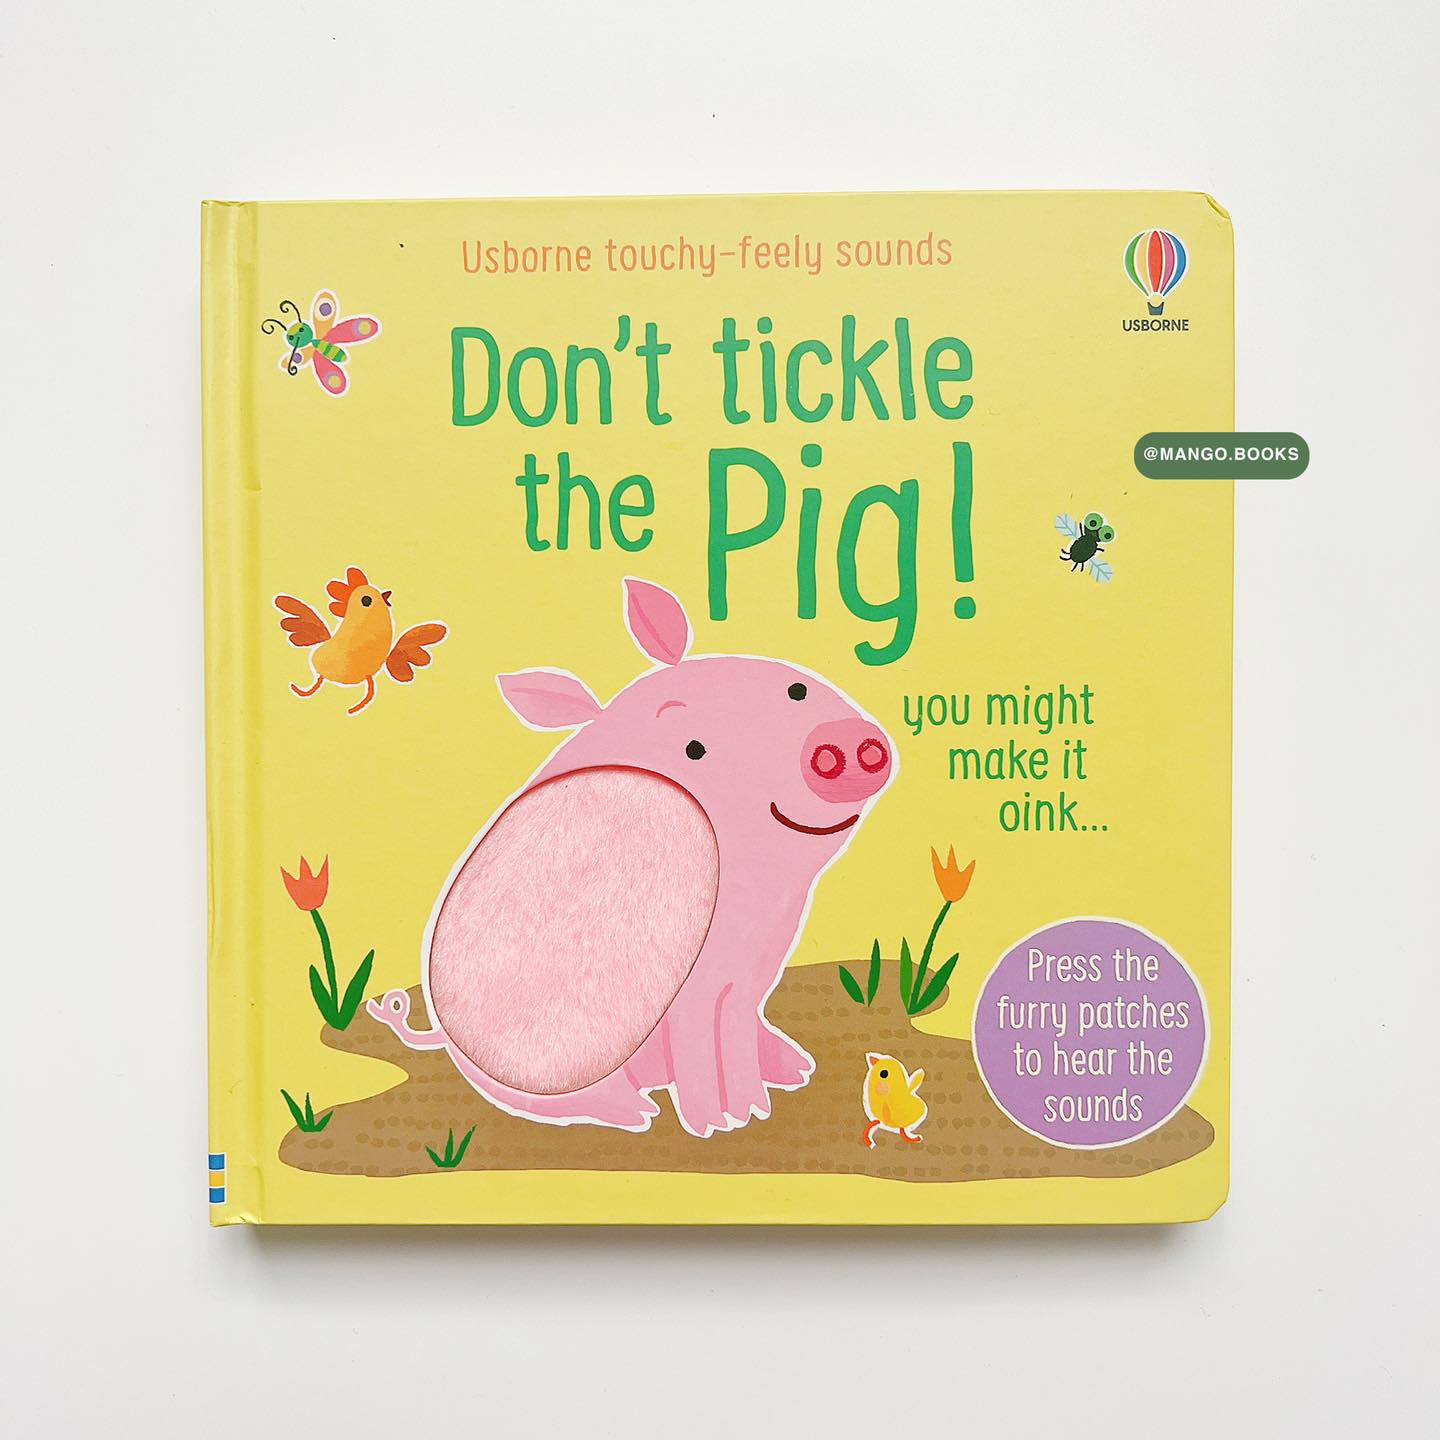 Usborne touchy-feely sounds: Don't tickle the Pig!